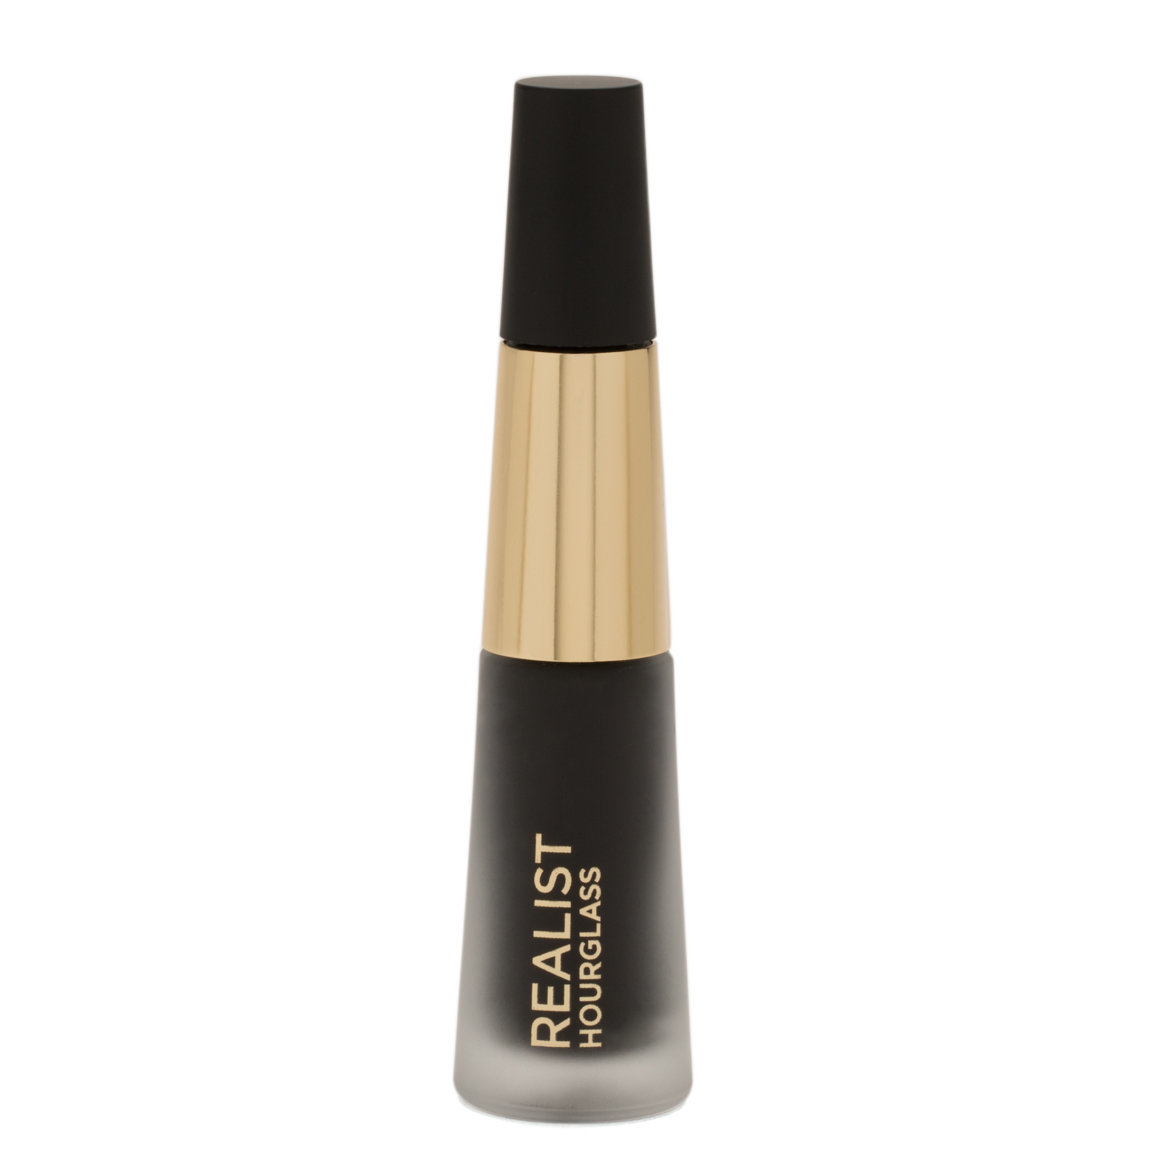 Hourglass Curator Realist Defining Mascara Formula alternative view 1 - product swatch.